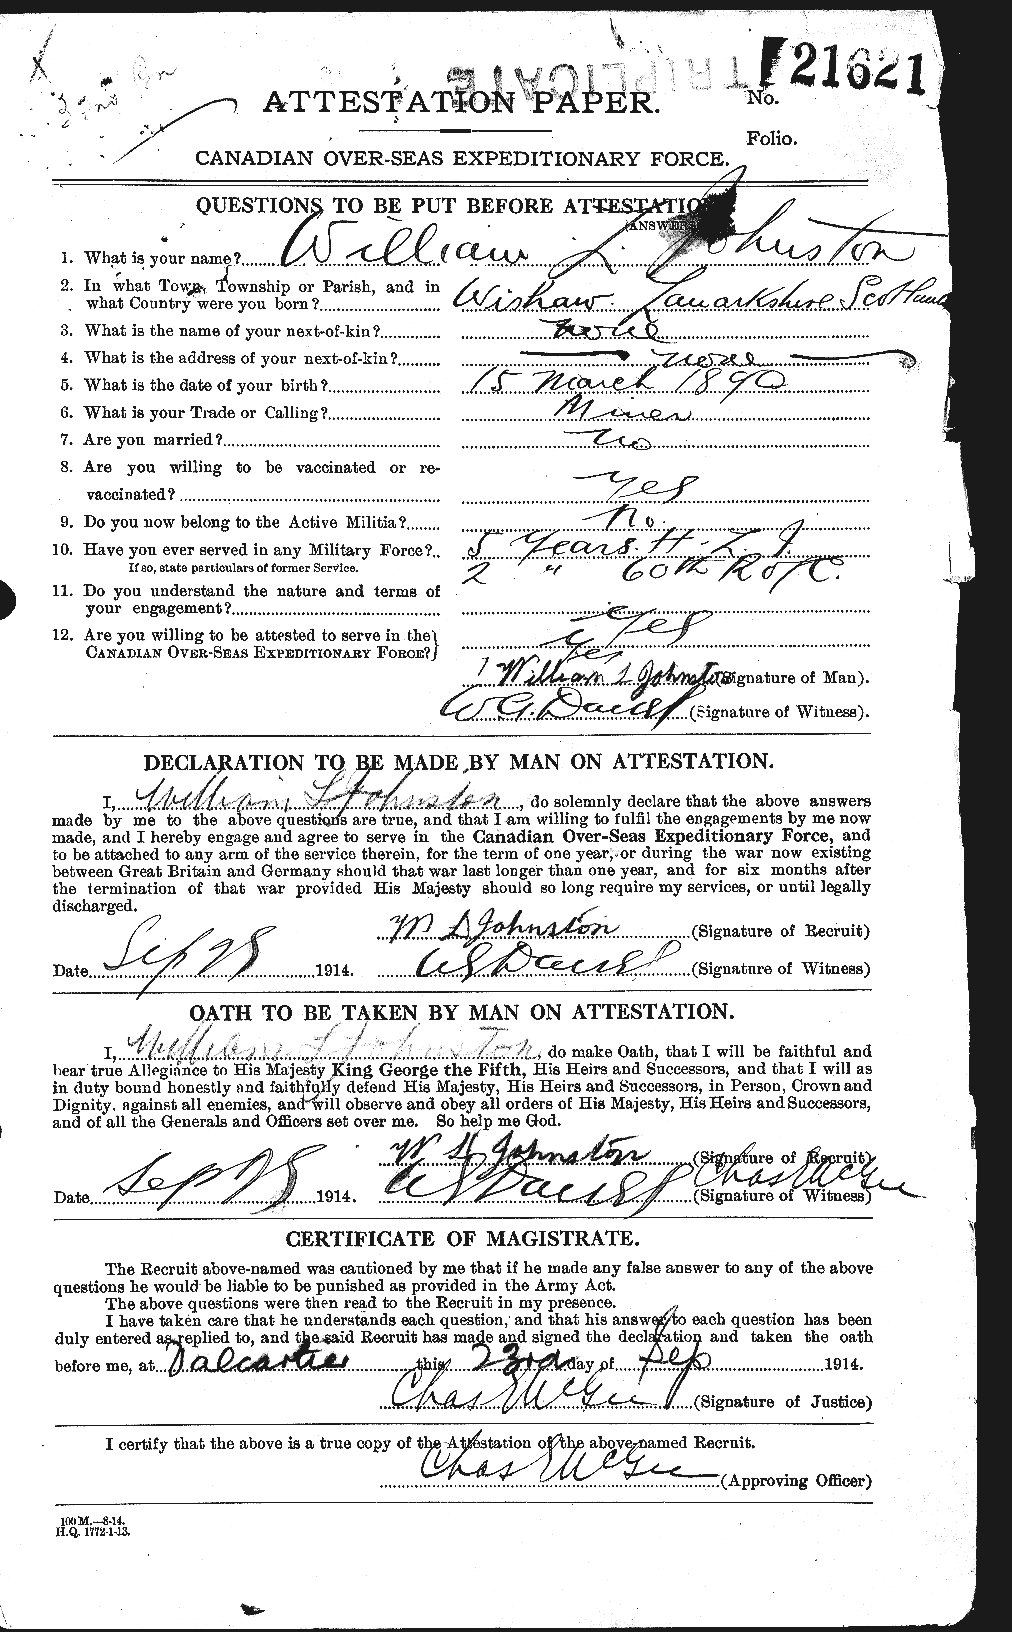 Personnel Records of the First World War - CEF 429597a